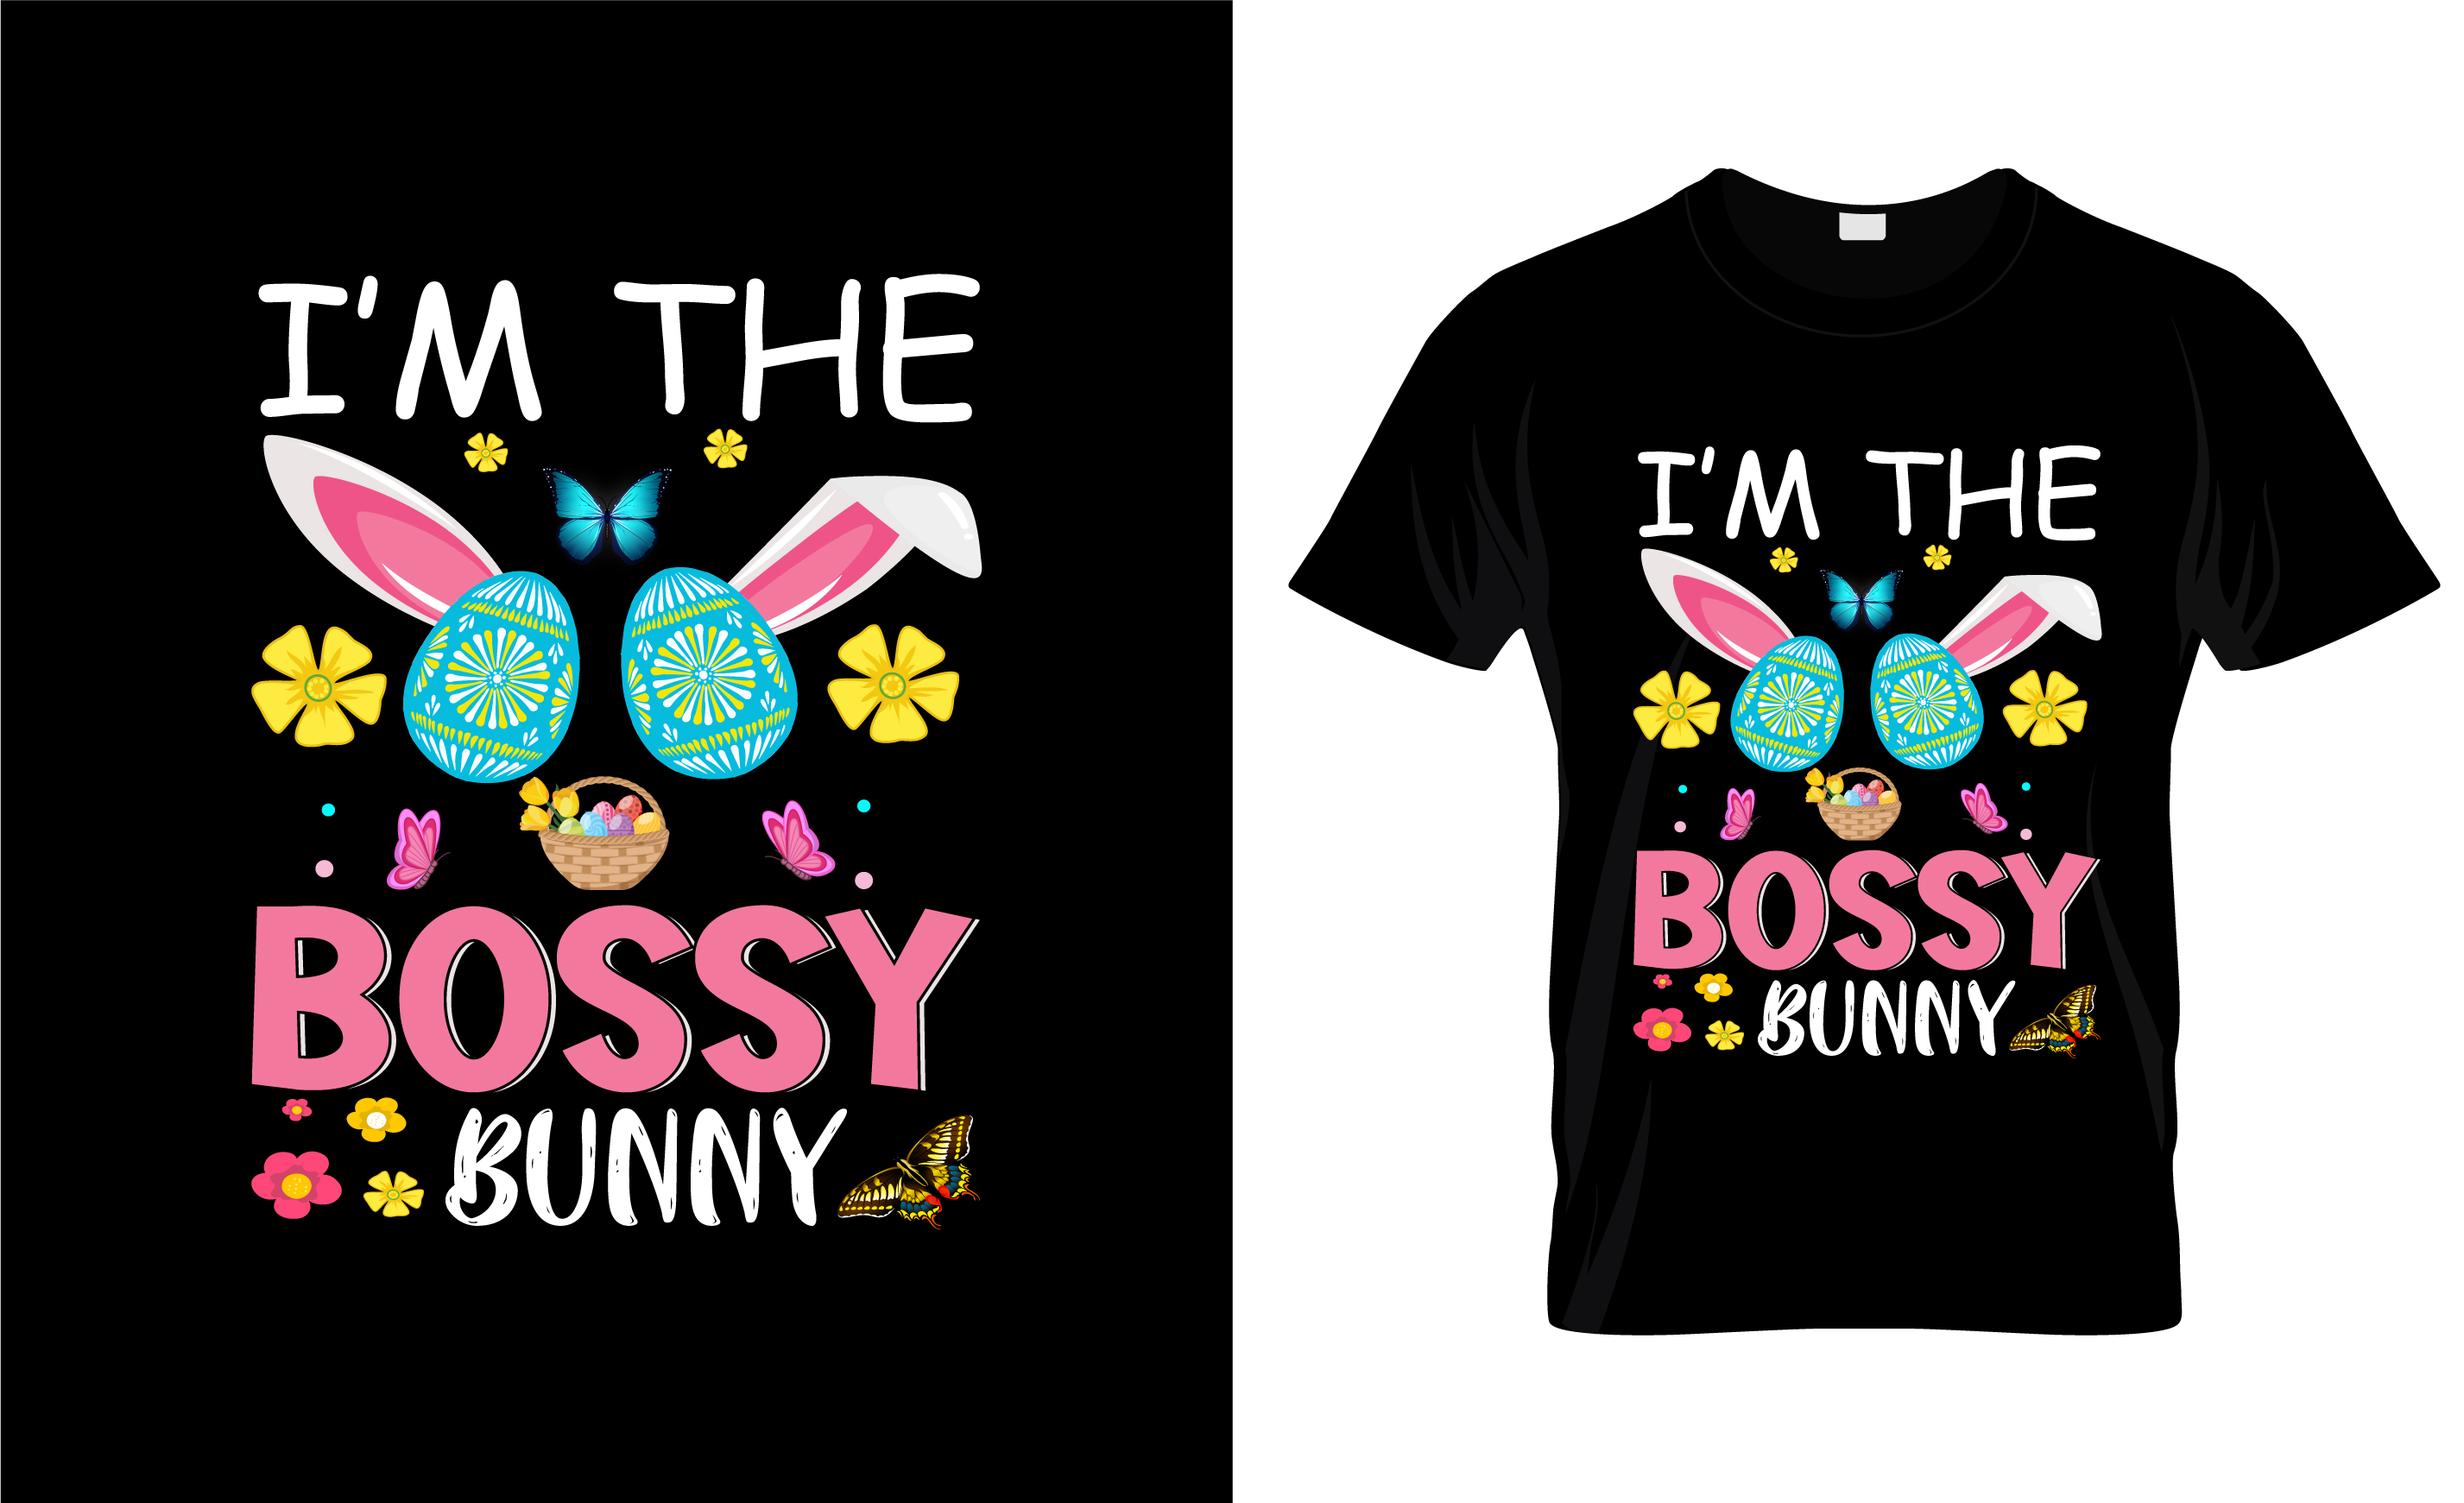 Image of a black t-shirt with unique prints on an easter theme.